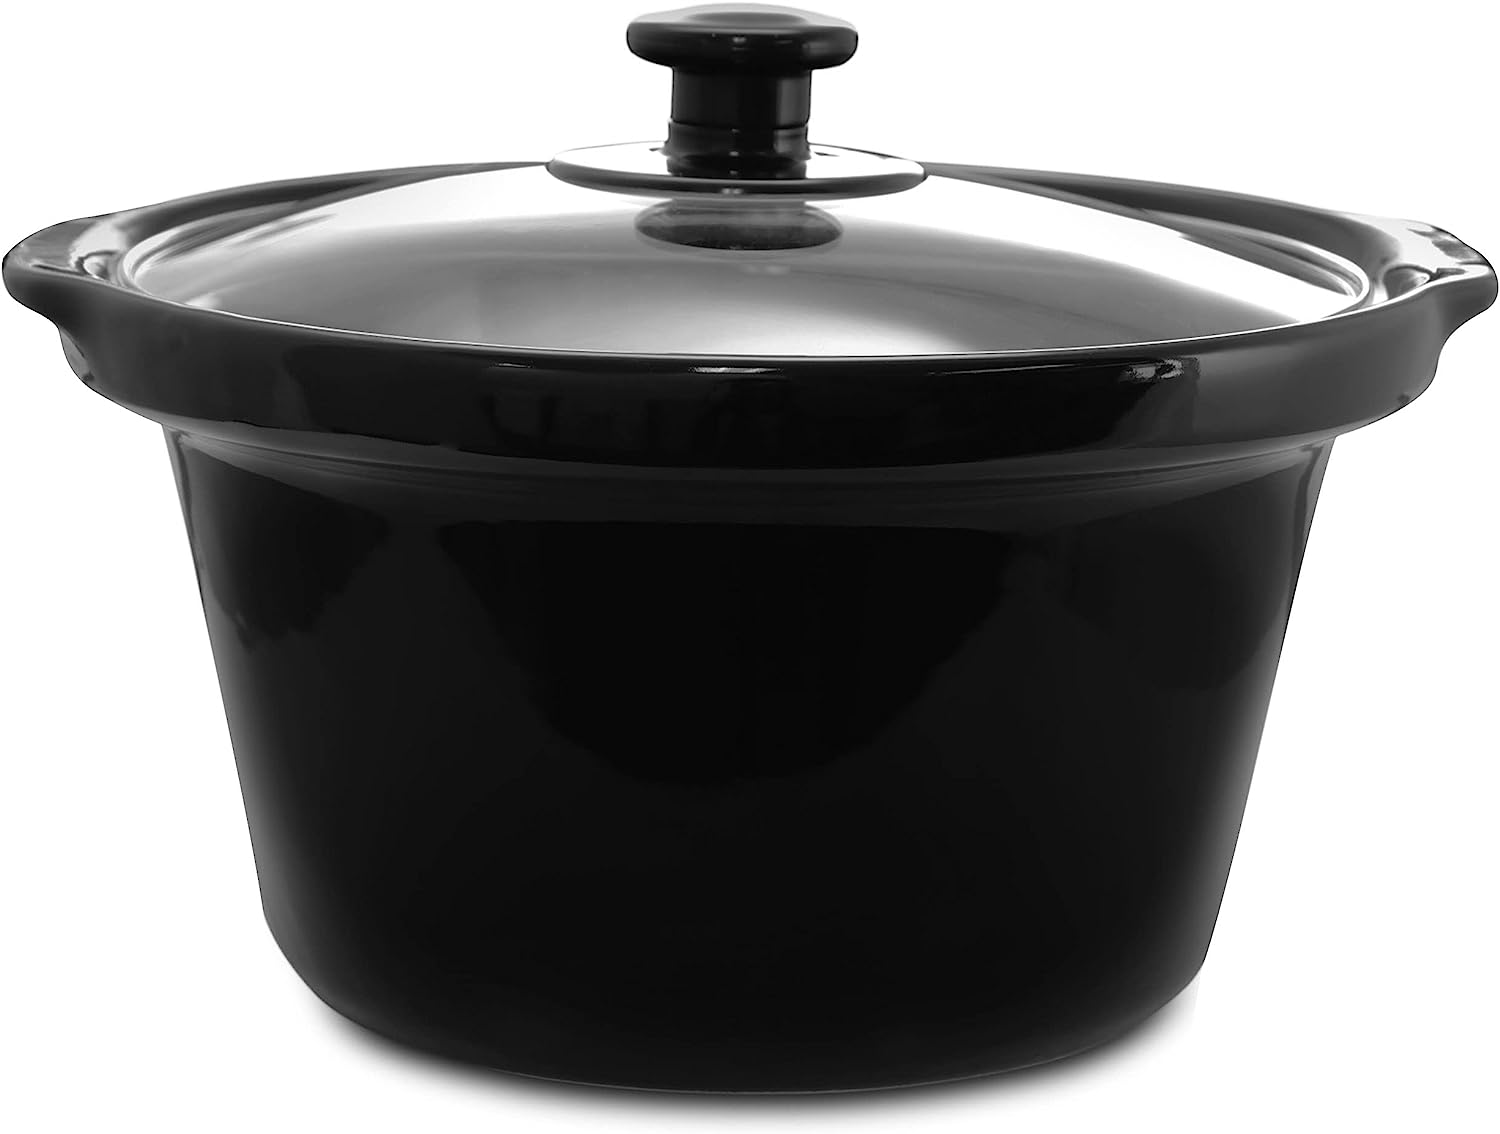 https://bigbigmart.com/wp-content/uploads/2023/07/Megachef-Triple-2.5-Quart-Slow-Cooker-and-Buffet-Server-in-Brushed-Copper-and-Black-Finish-with-3-Ceramic-Cooking-Pots-and-Removable-Lid-Rests5.jpg